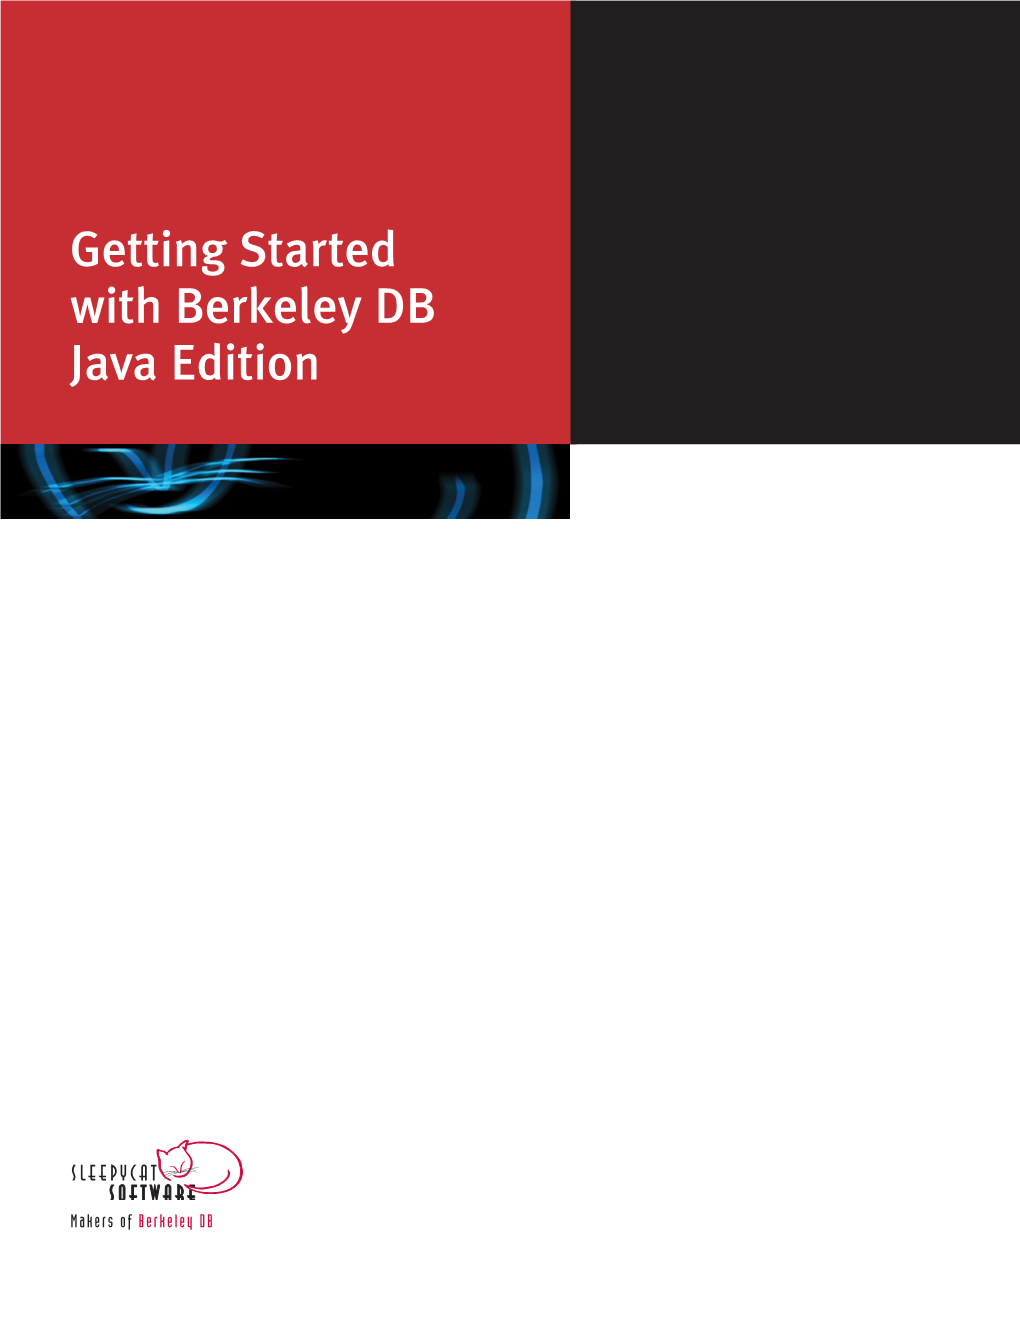 Getting Started with Berkeley DB Java Edition